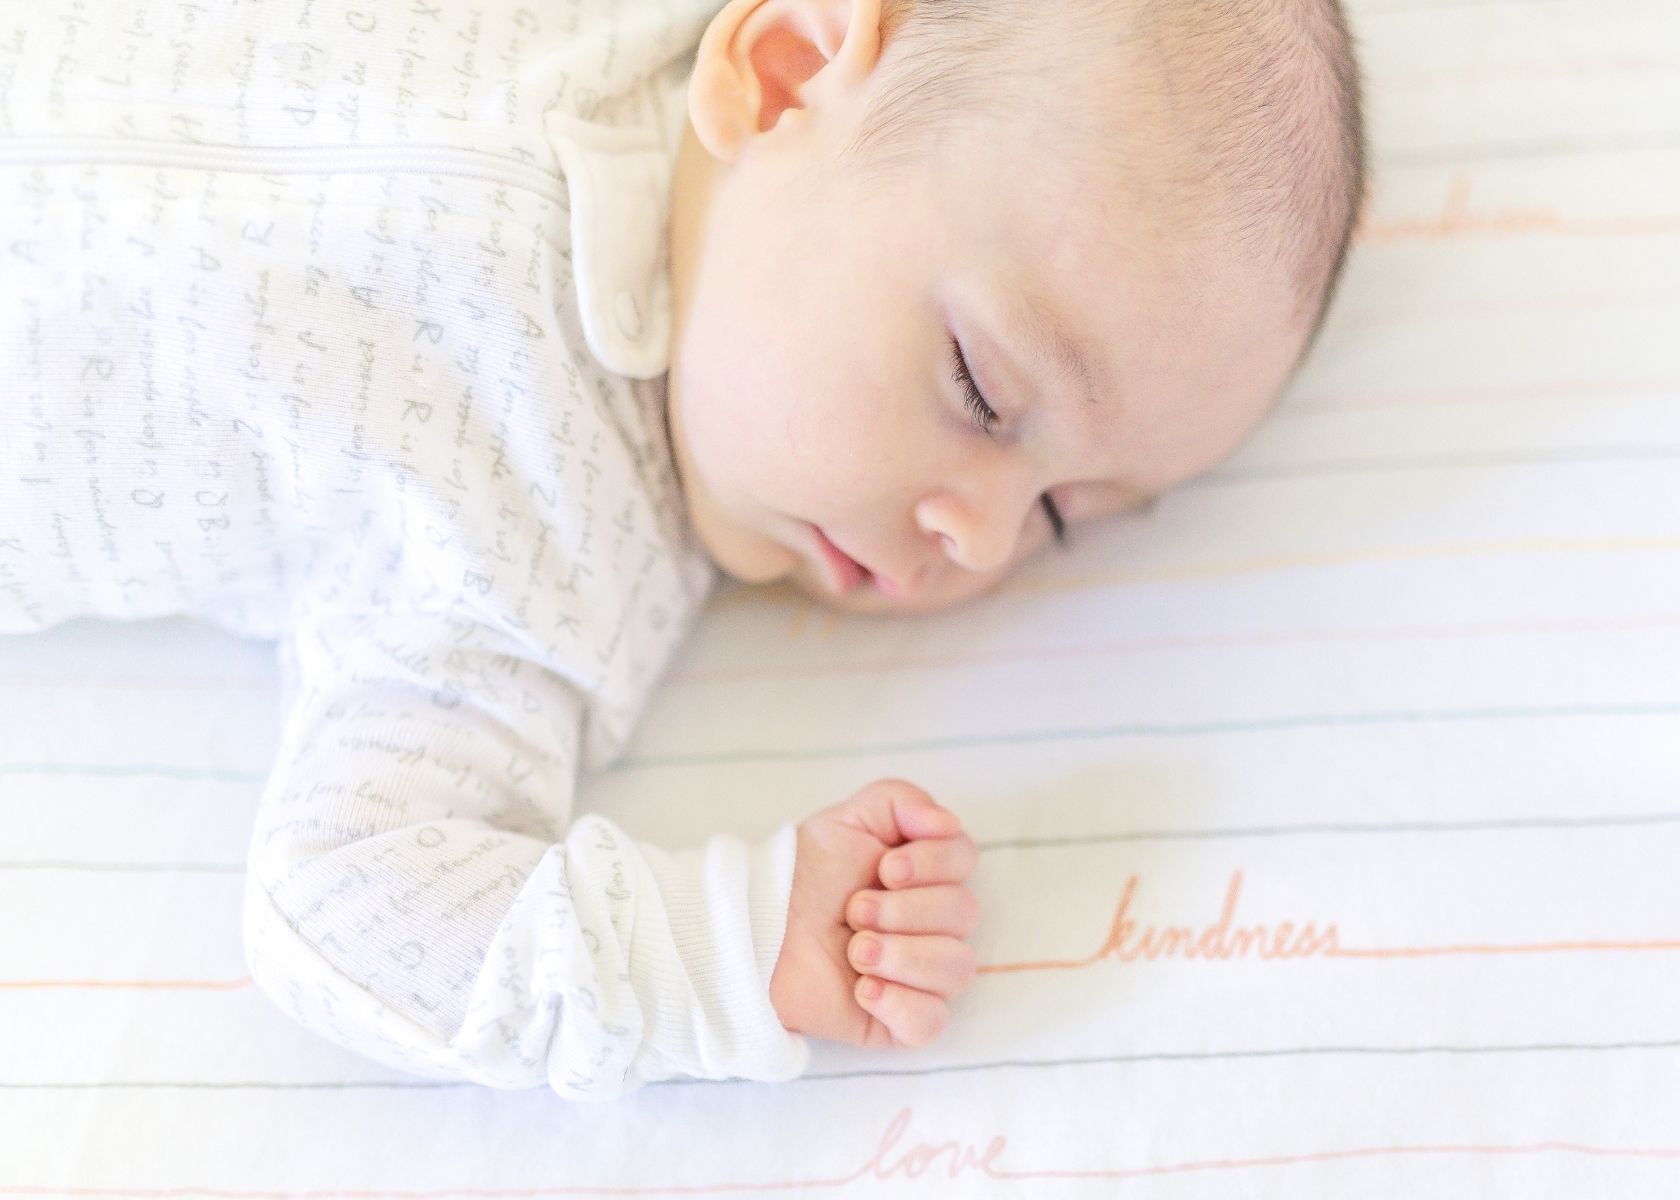 Baby wearing white outfit naps on sheets that say kindness.